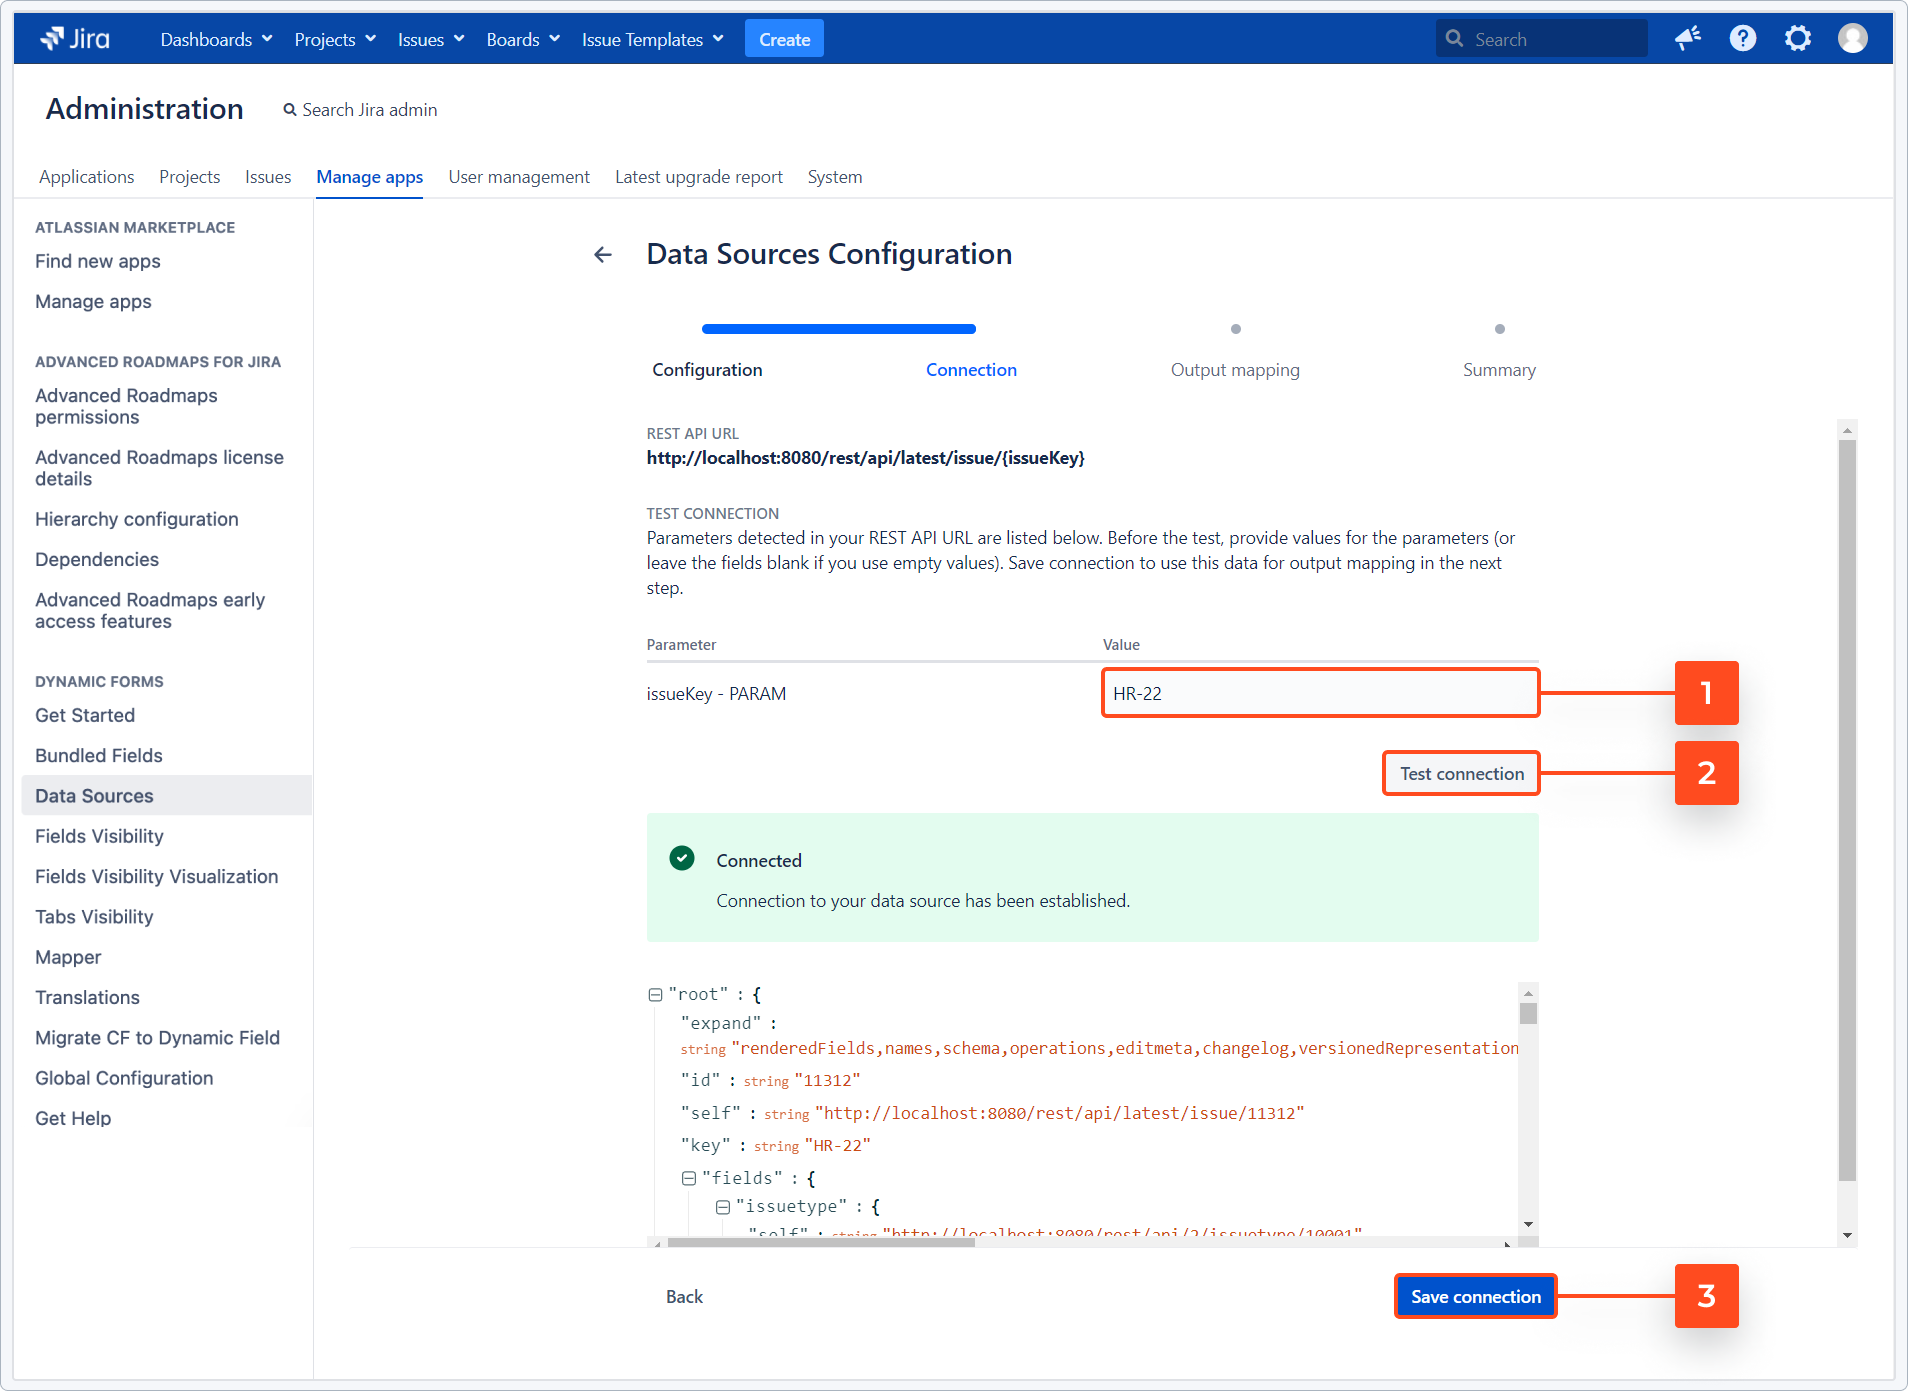 Dynamic Forms for Jira - Bundled Fields Data Sources: Test connection with additional parameters